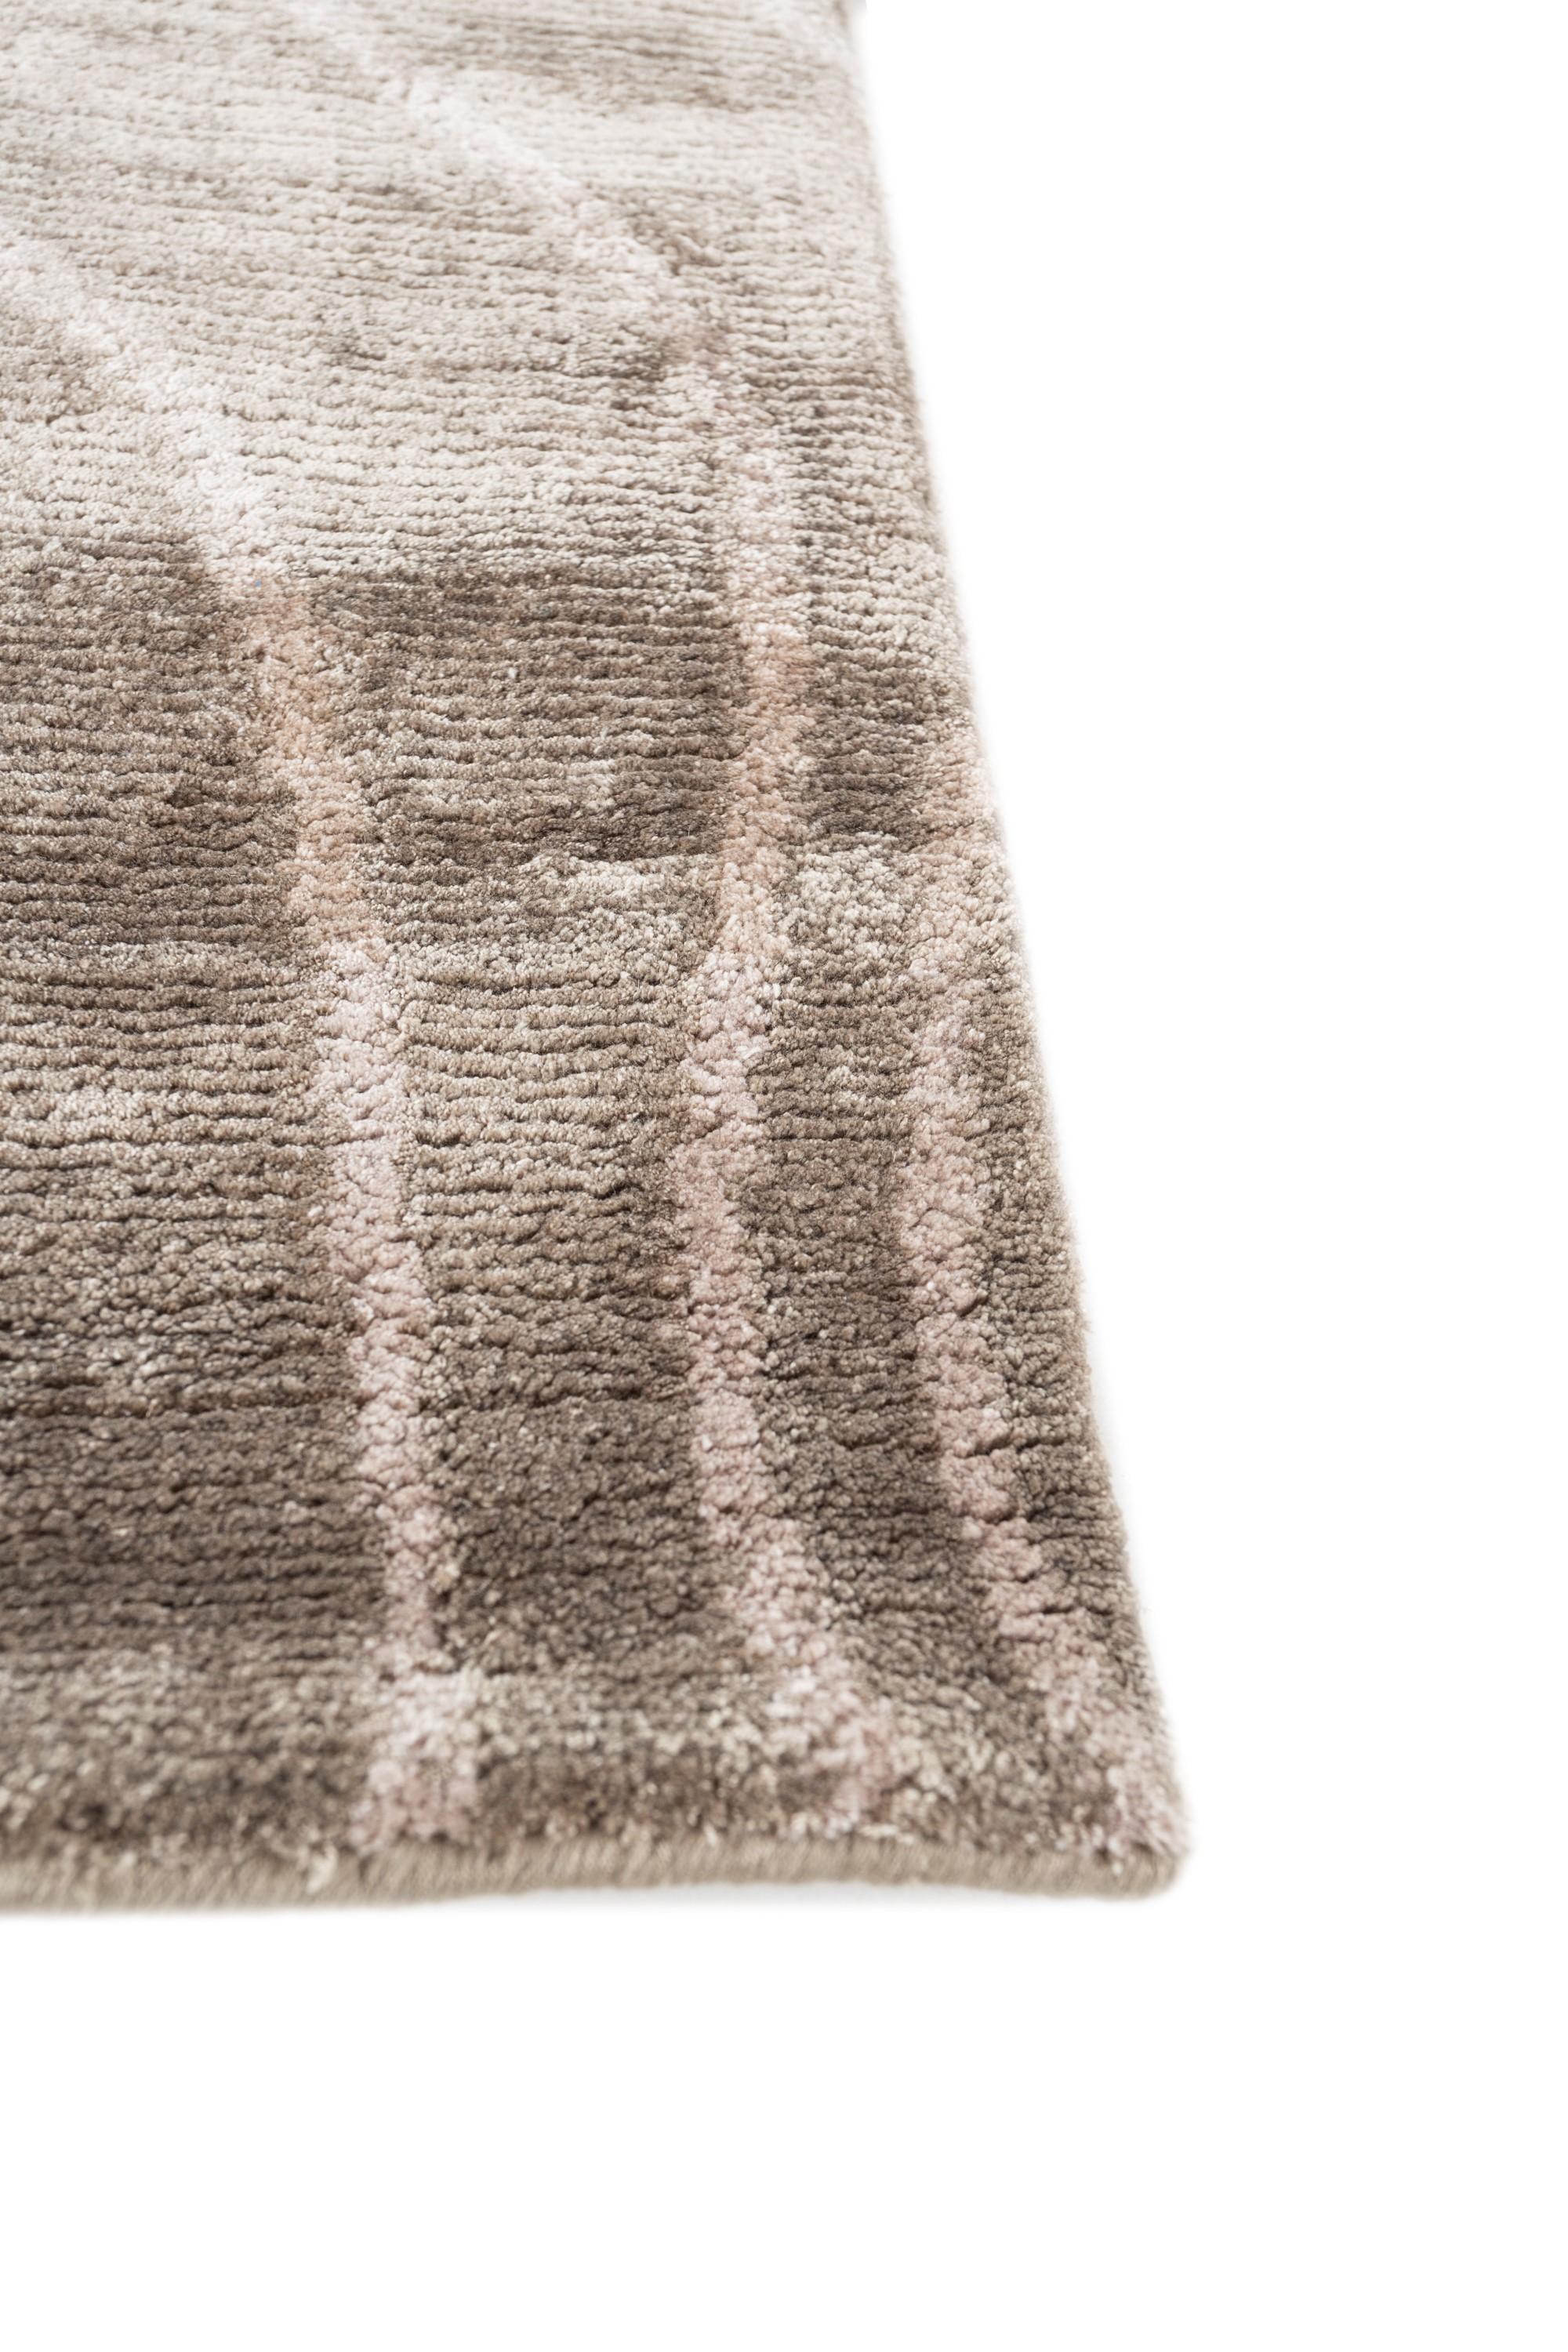 Have you checked this hand-knotted rug , meticulously handmade in rural India? With a tone-on-tone palette, featuring a mushroom ground color and a dark taupe border, this modern rug effortlessly uplifts the mood of any space. Beyond aesthetics, it